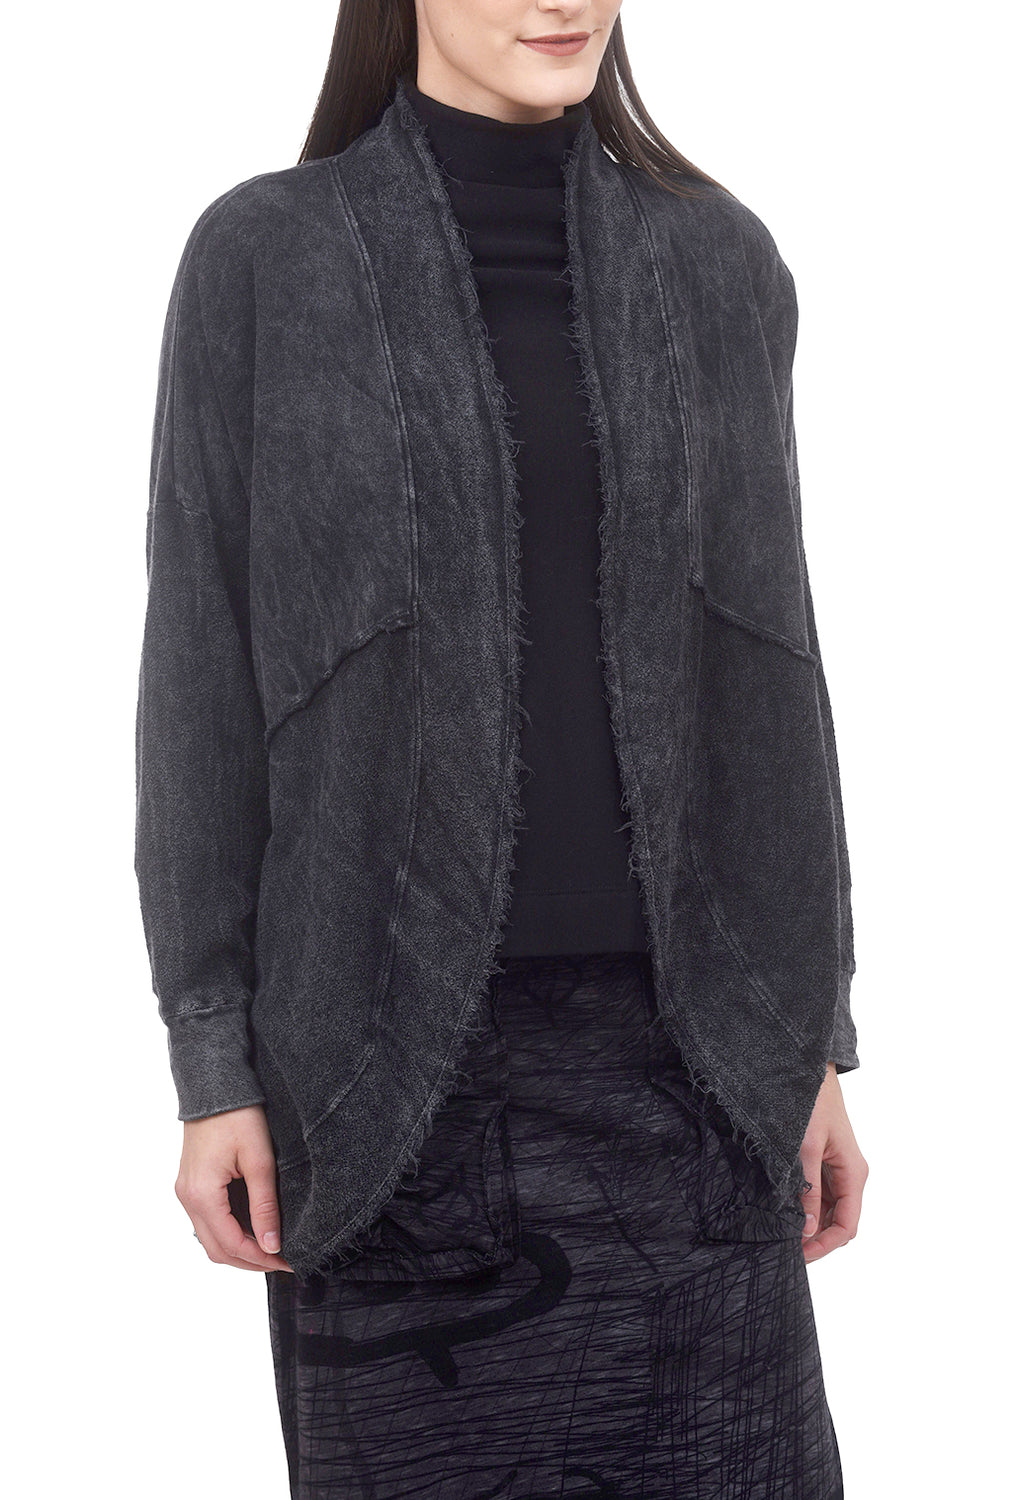 Mineral Wash Terry Jacket, Onyx